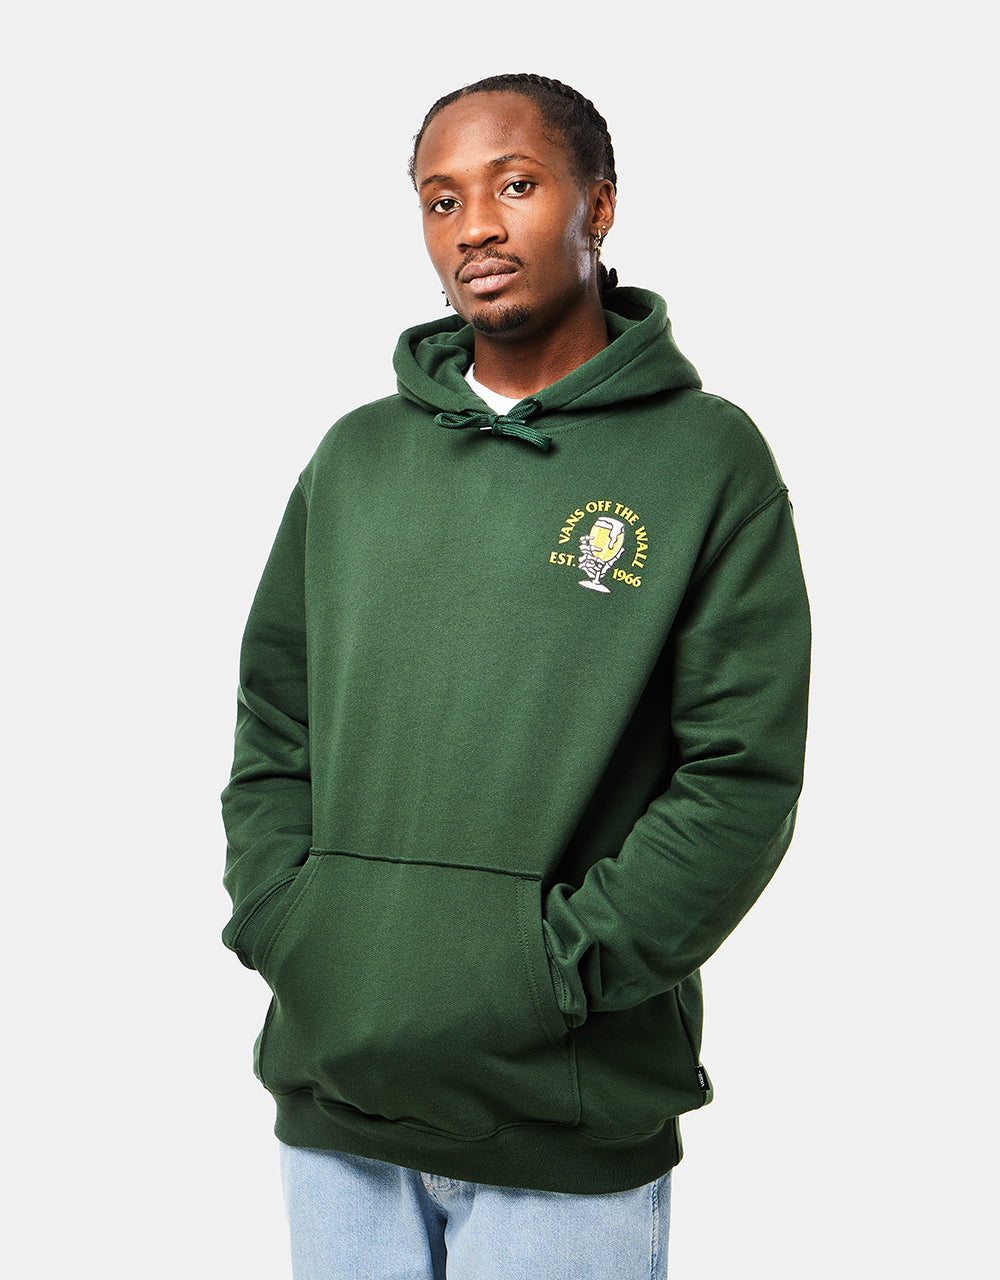 Vans The Coolest In Town Pullover Hoodie - Mountain View